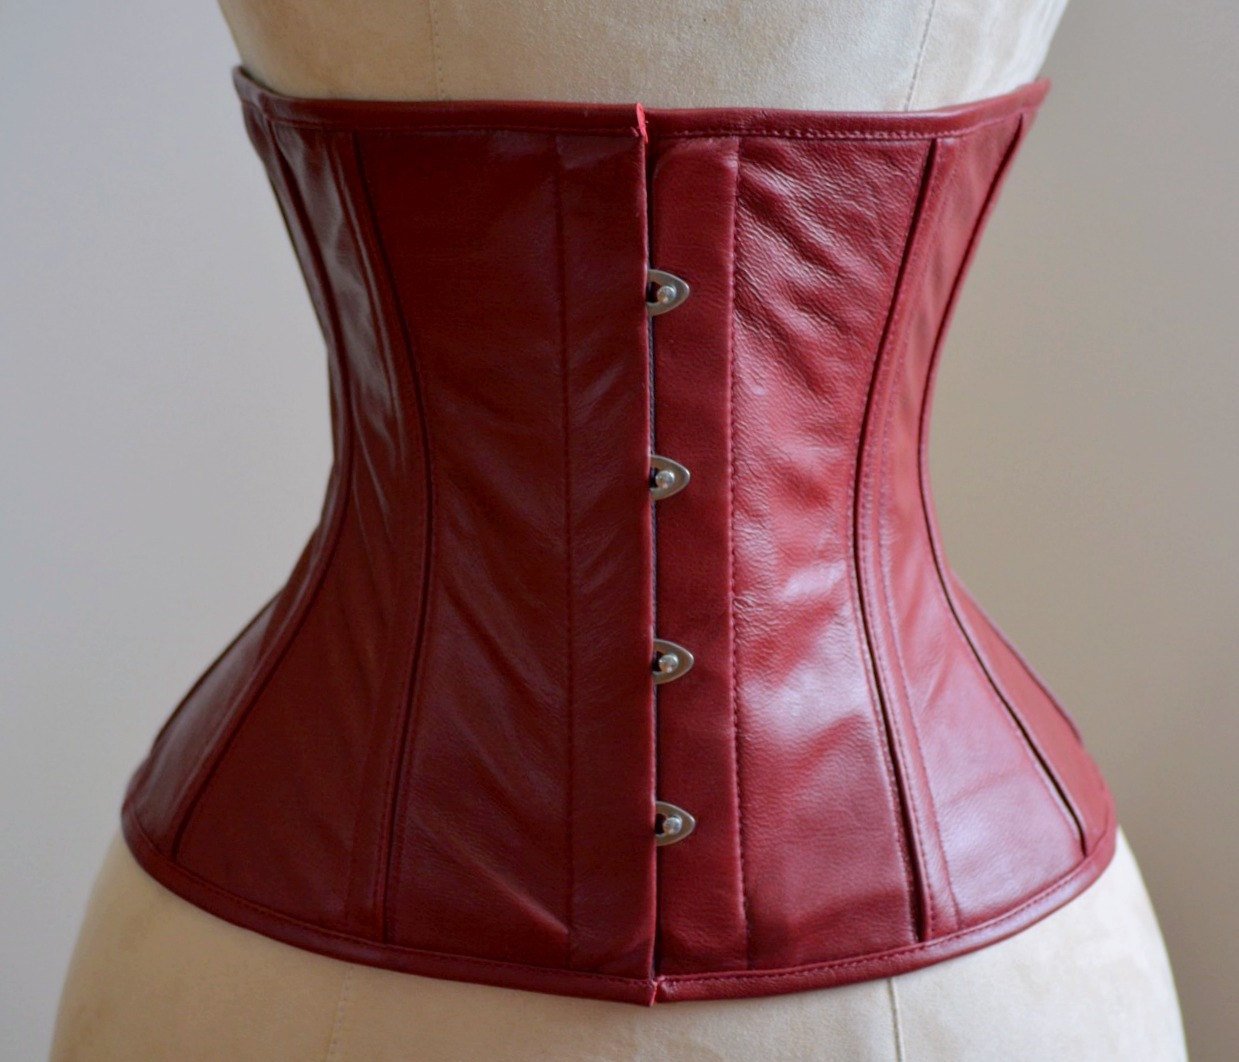 Lambskin halfbust steel-boned authentic heavy corset, baby blue and pink  colors, waist training corset.